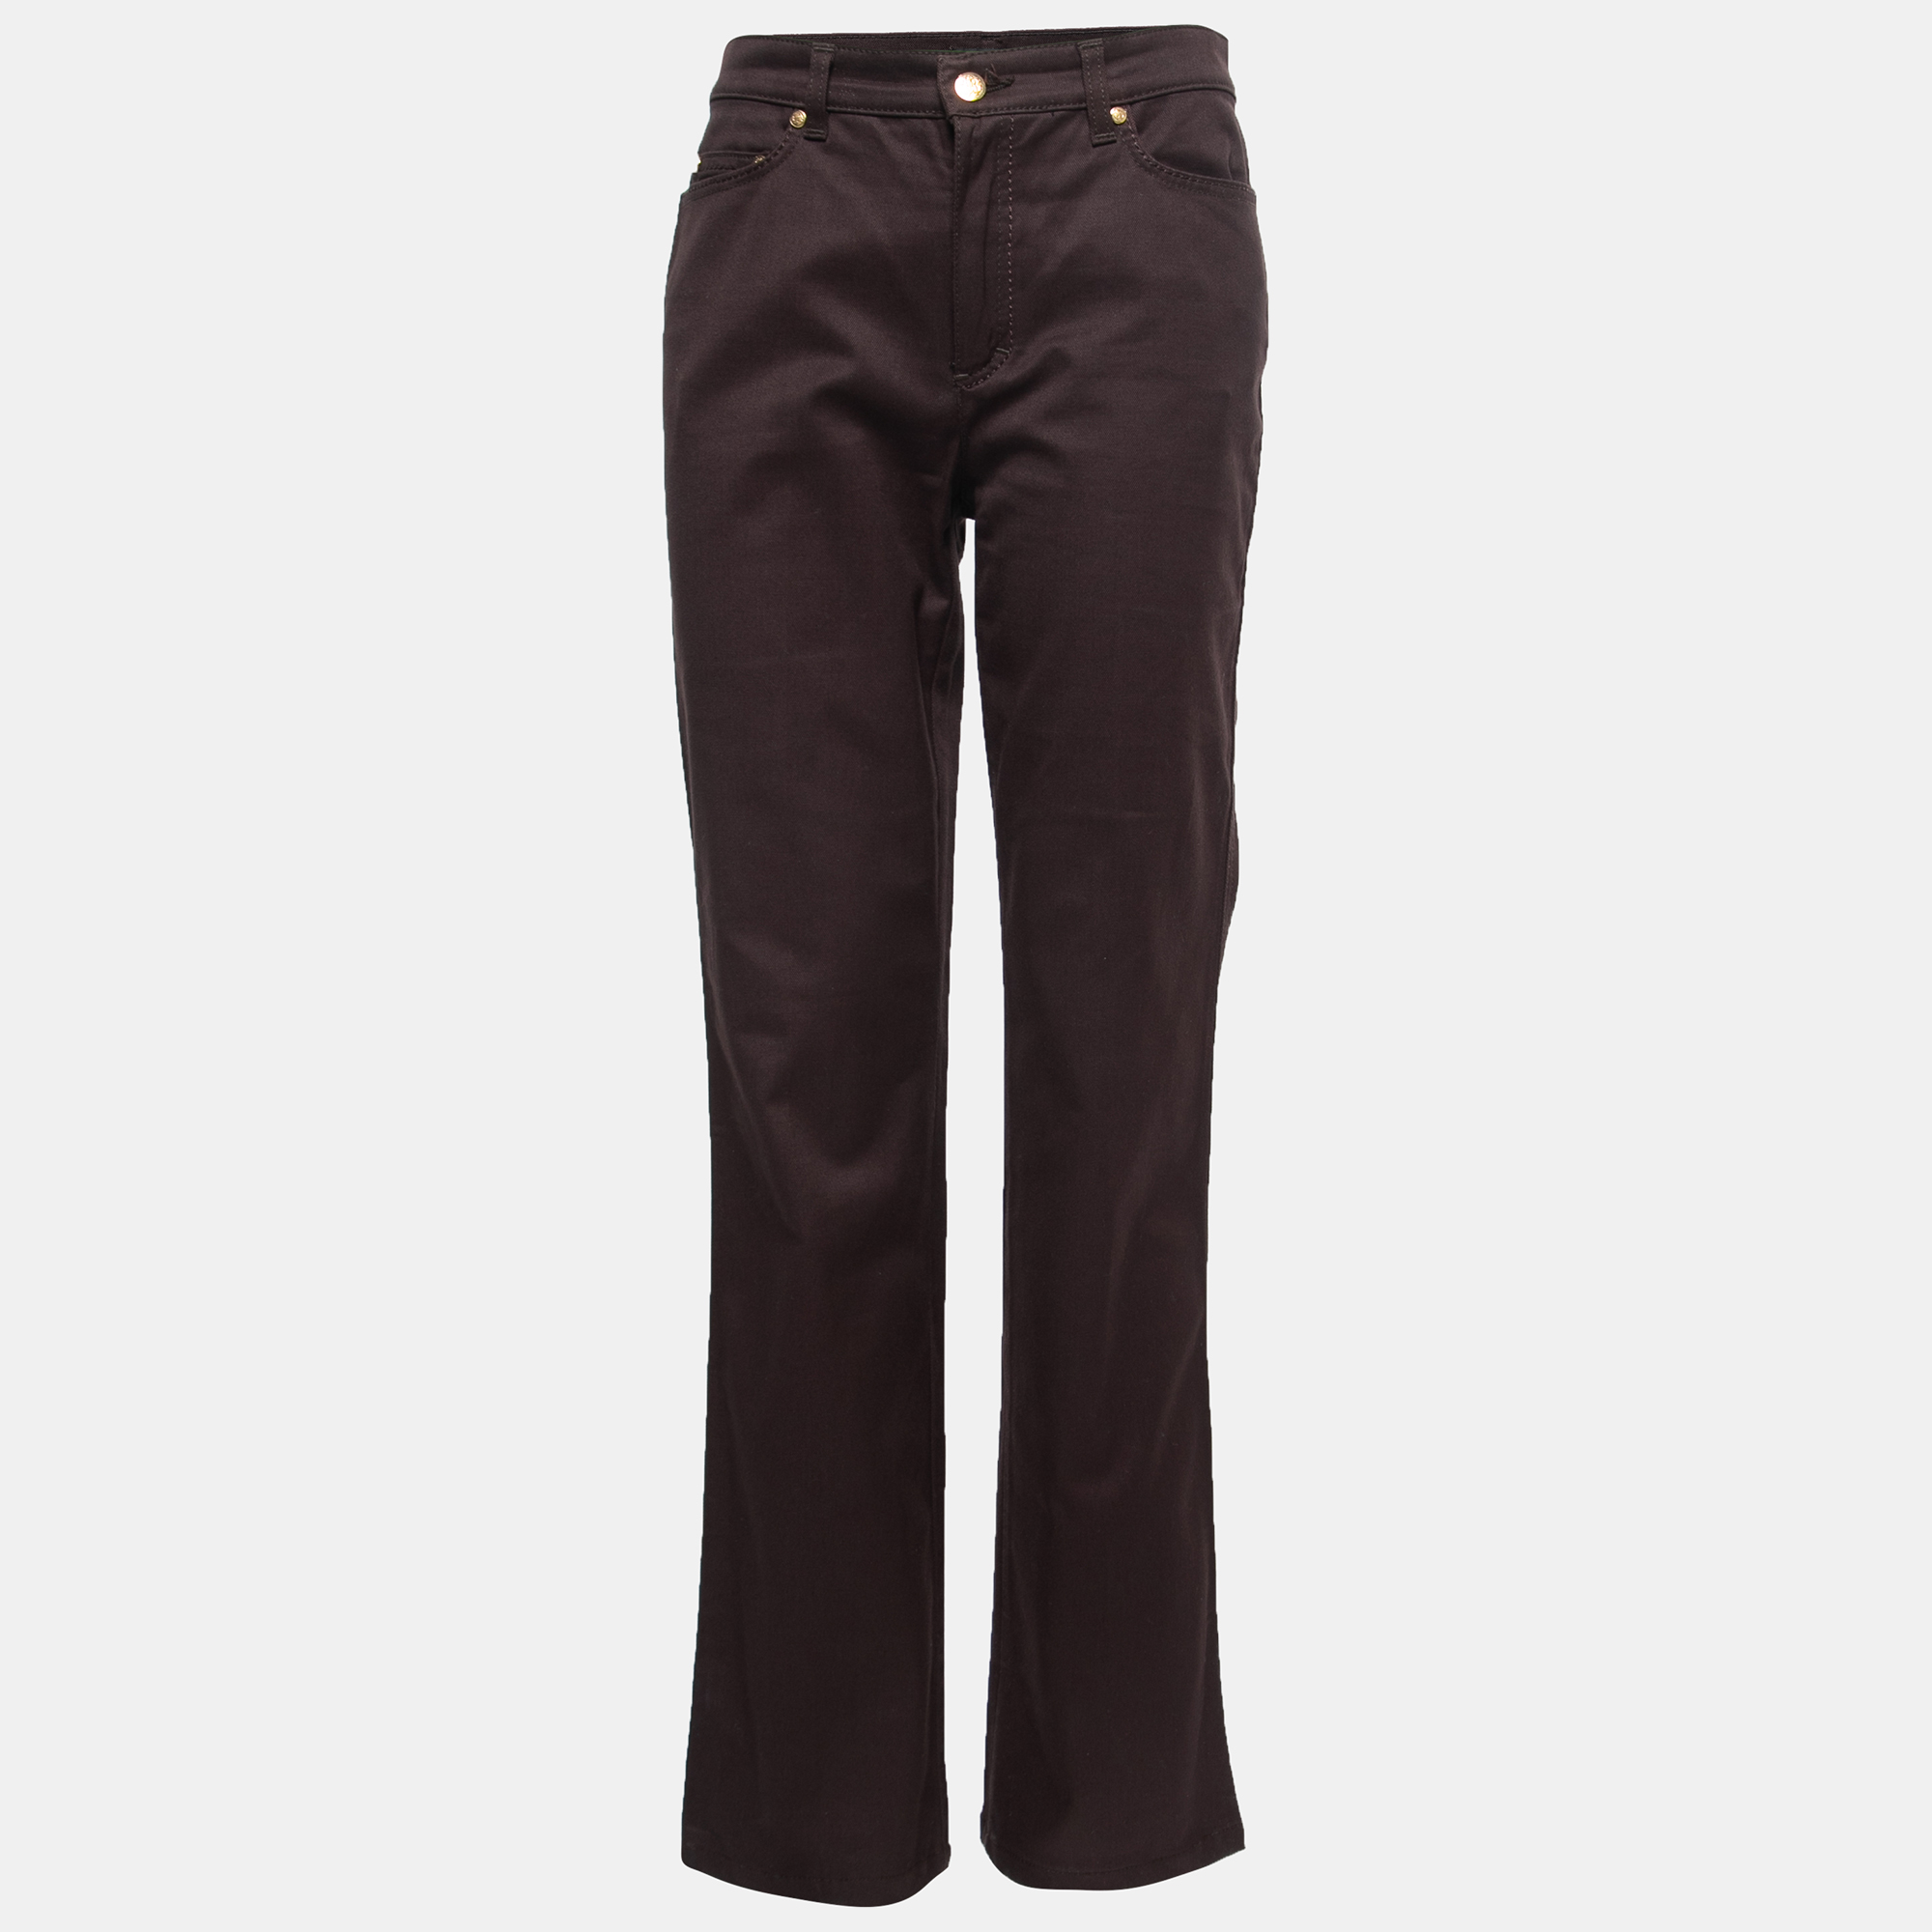 Your wardrobe can never be complete with a great pair of jeans like this. Tailored from qualitative fabric this pair showcases classic detailing an easy closure style and pockets. Pair it with your casual blouses or tops.